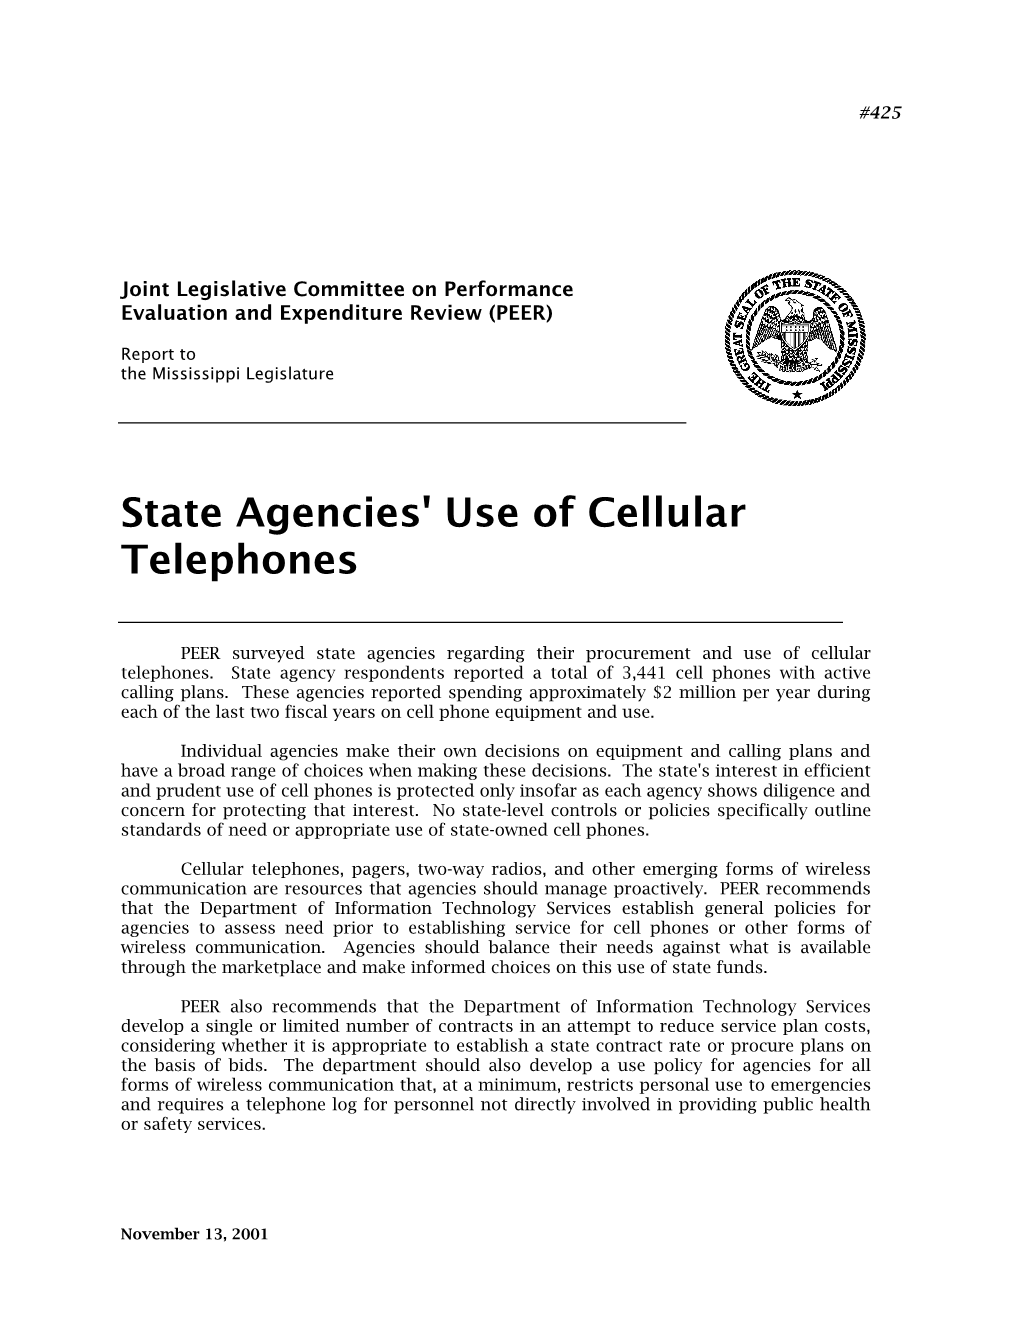 State Agencies' Use of Cellular Telephones